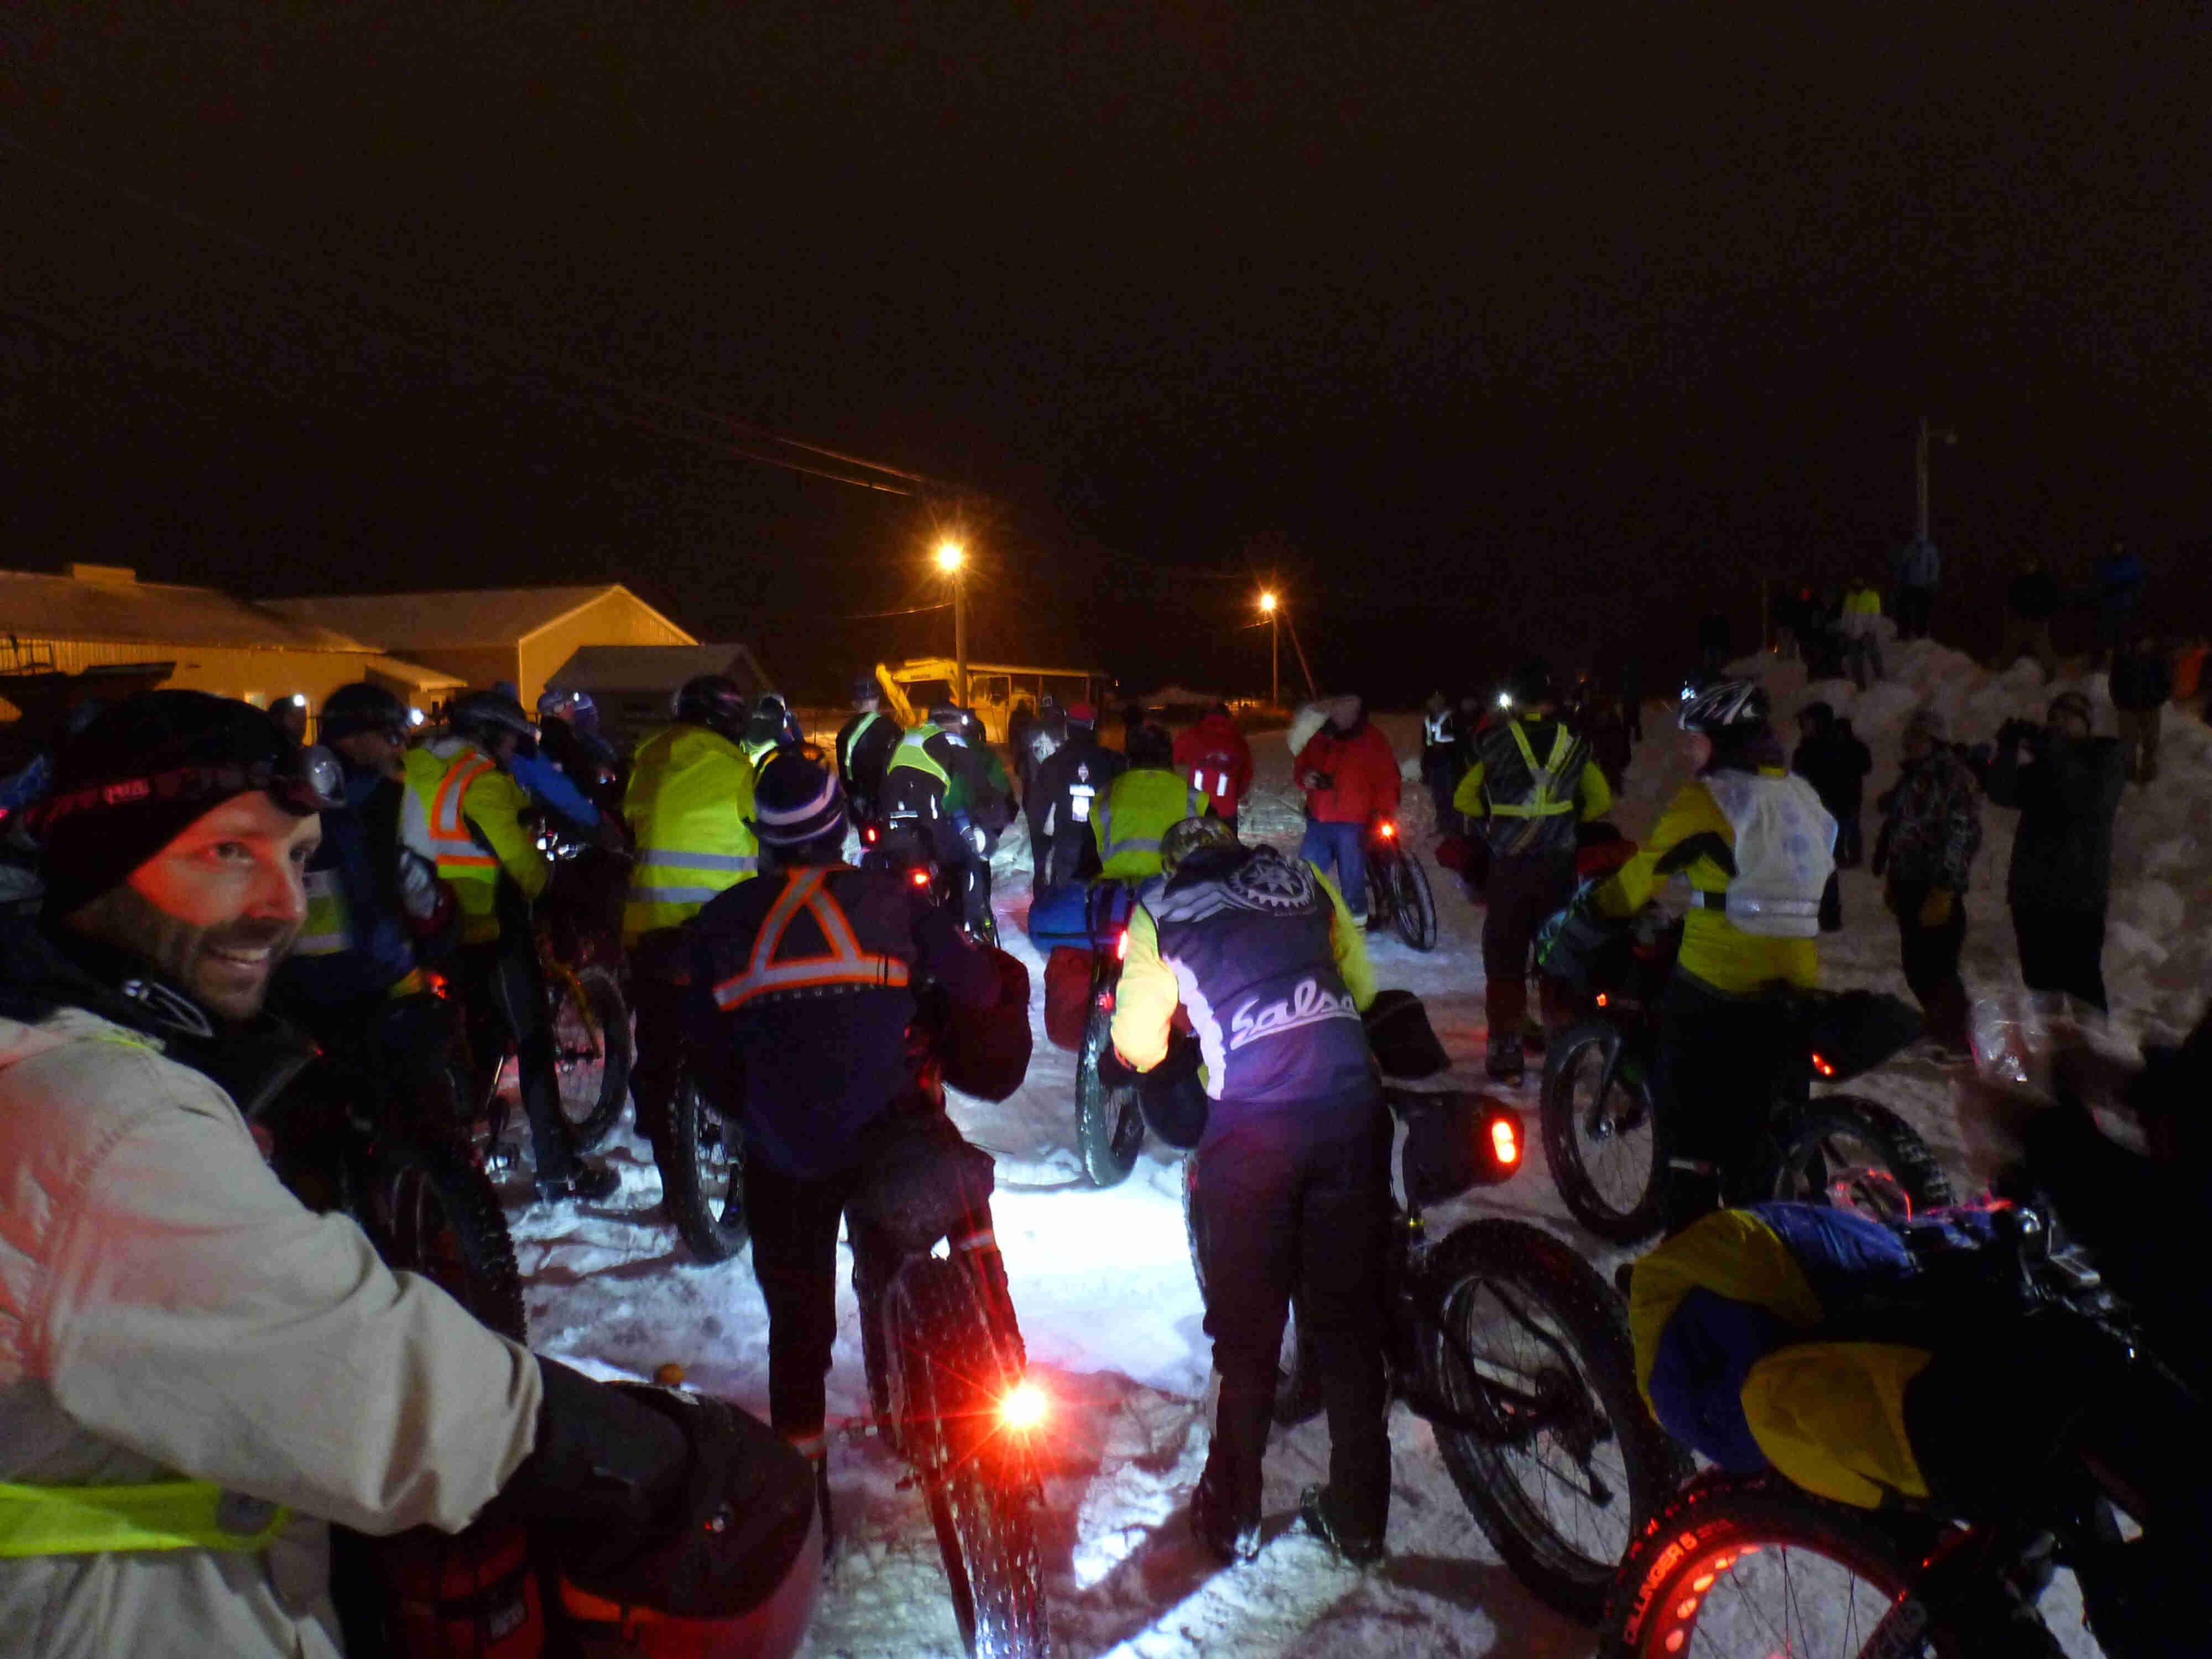 A group of cyclists and their bikes, gathered together on a snow covered lot at night